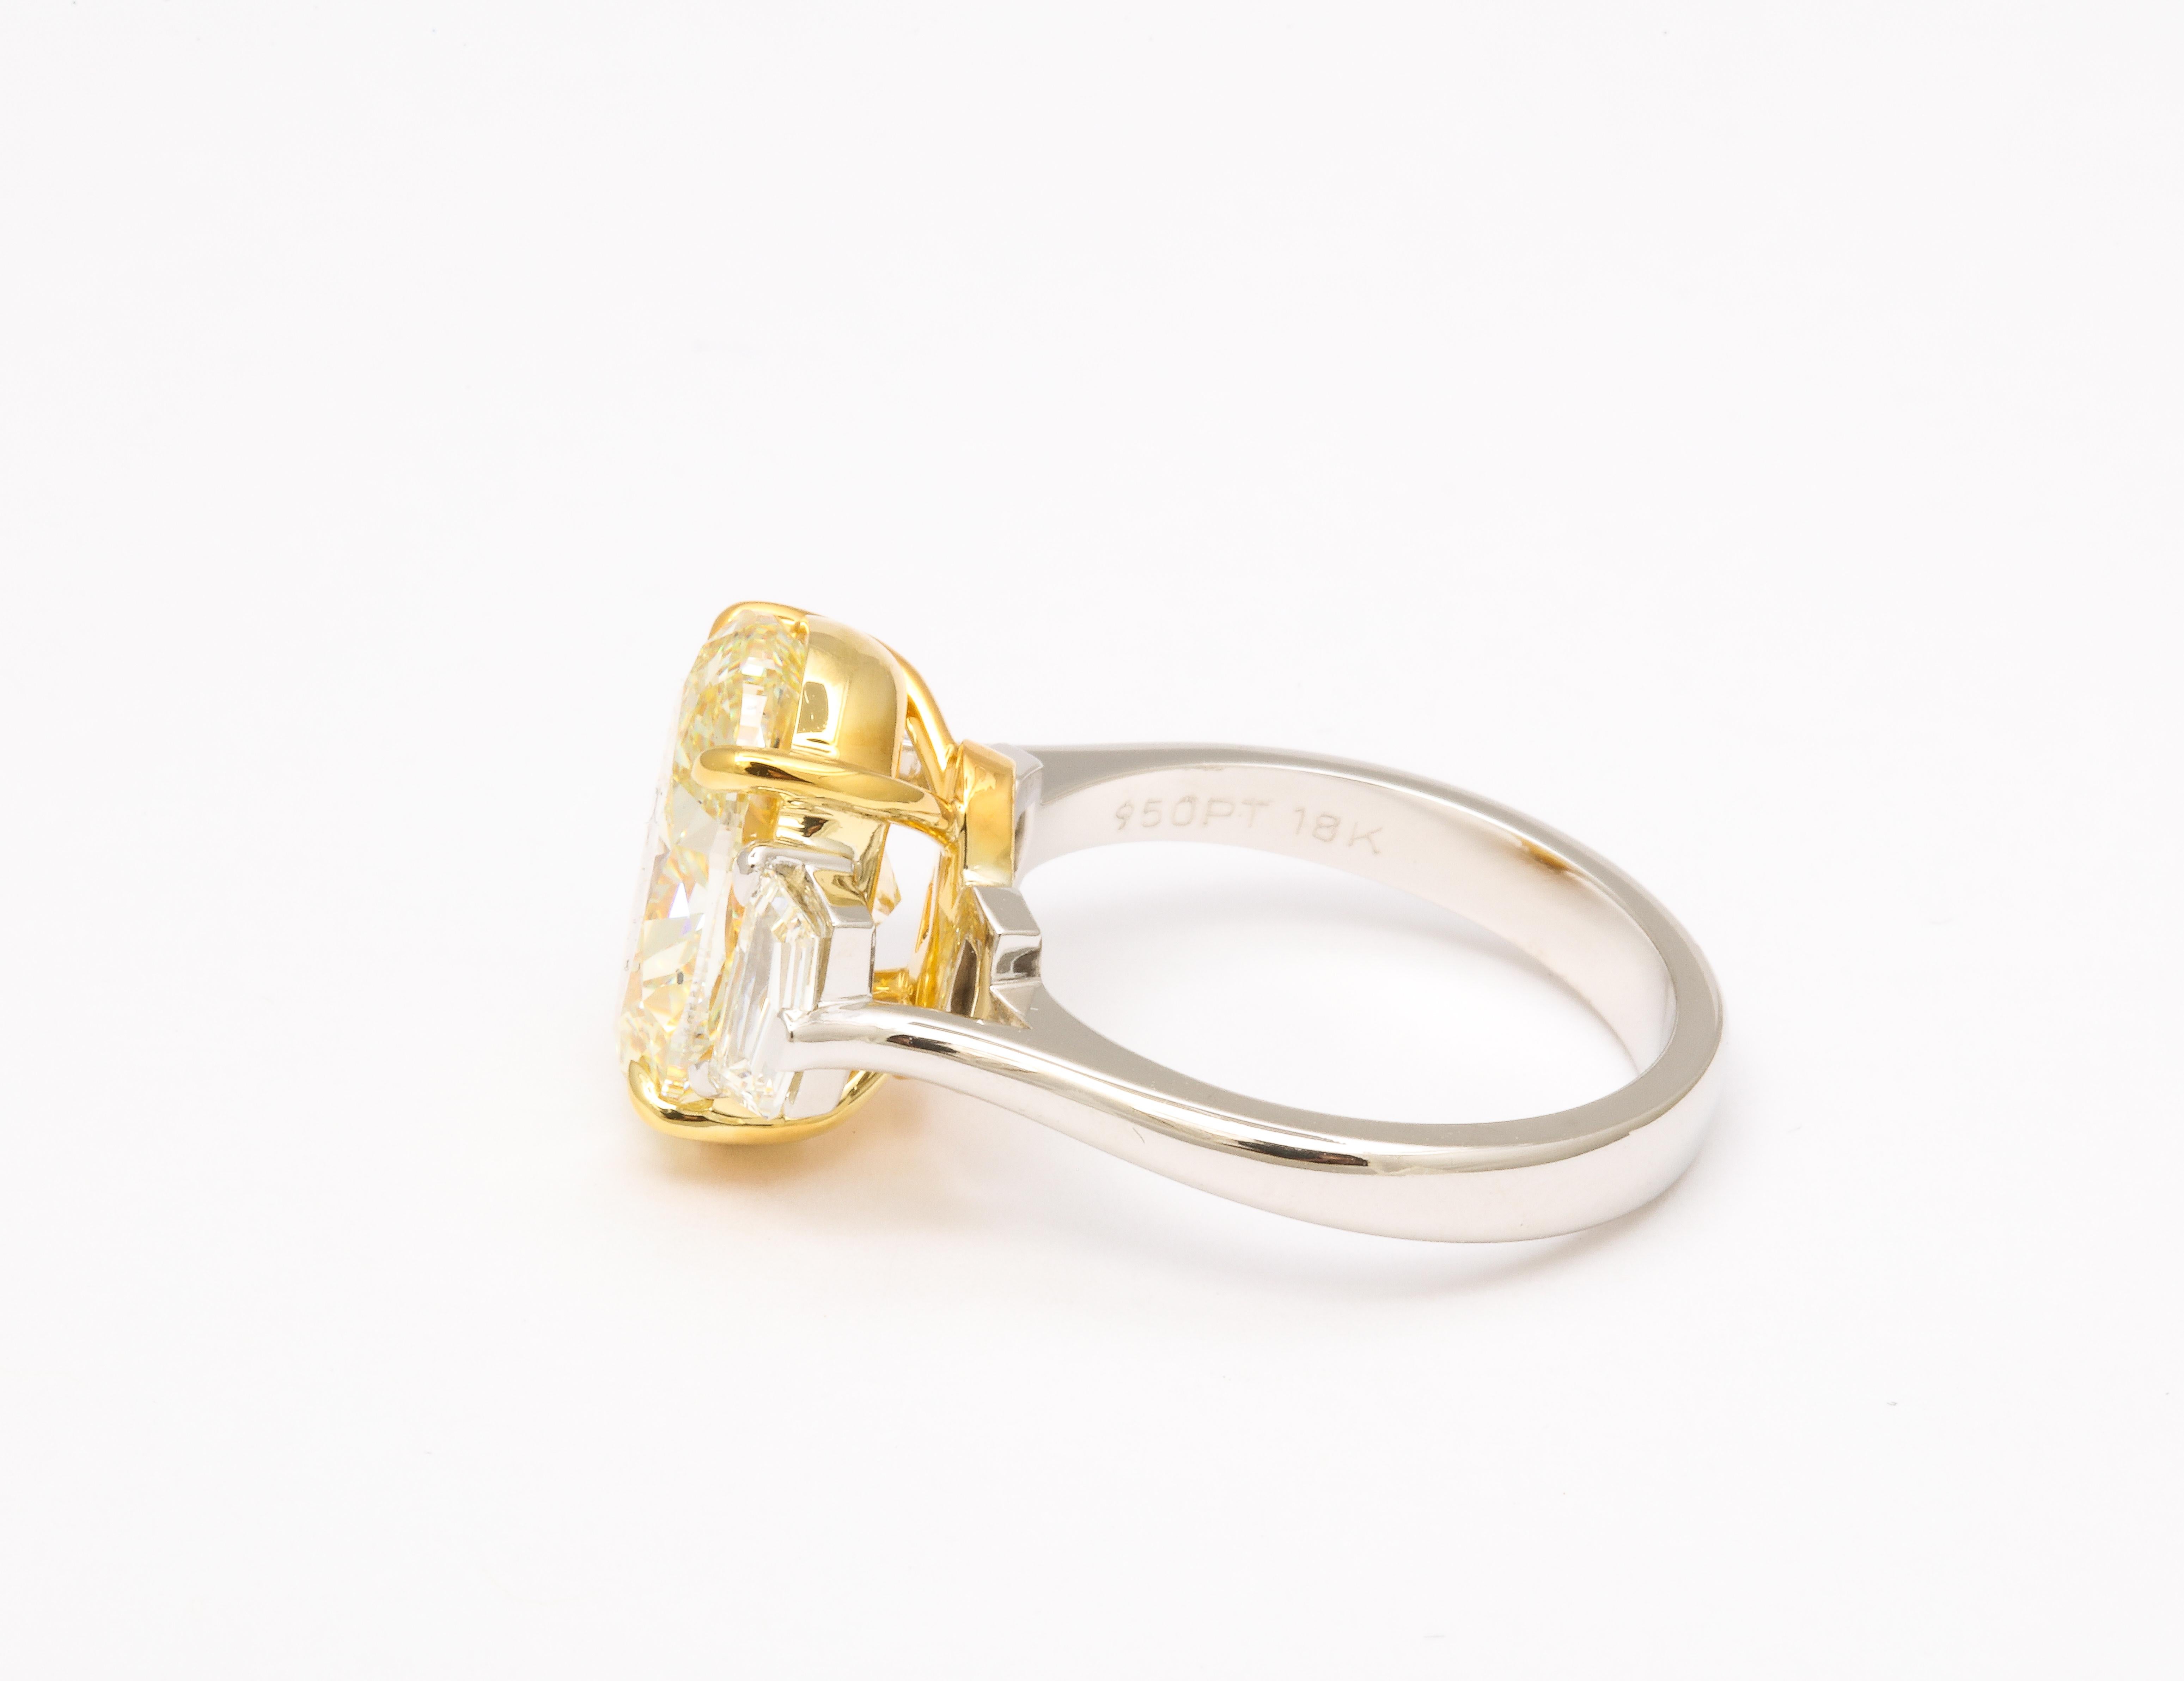 Women's or Men's 6 Carat Oval Yellow Diamond Ring Gia Certified For Sale